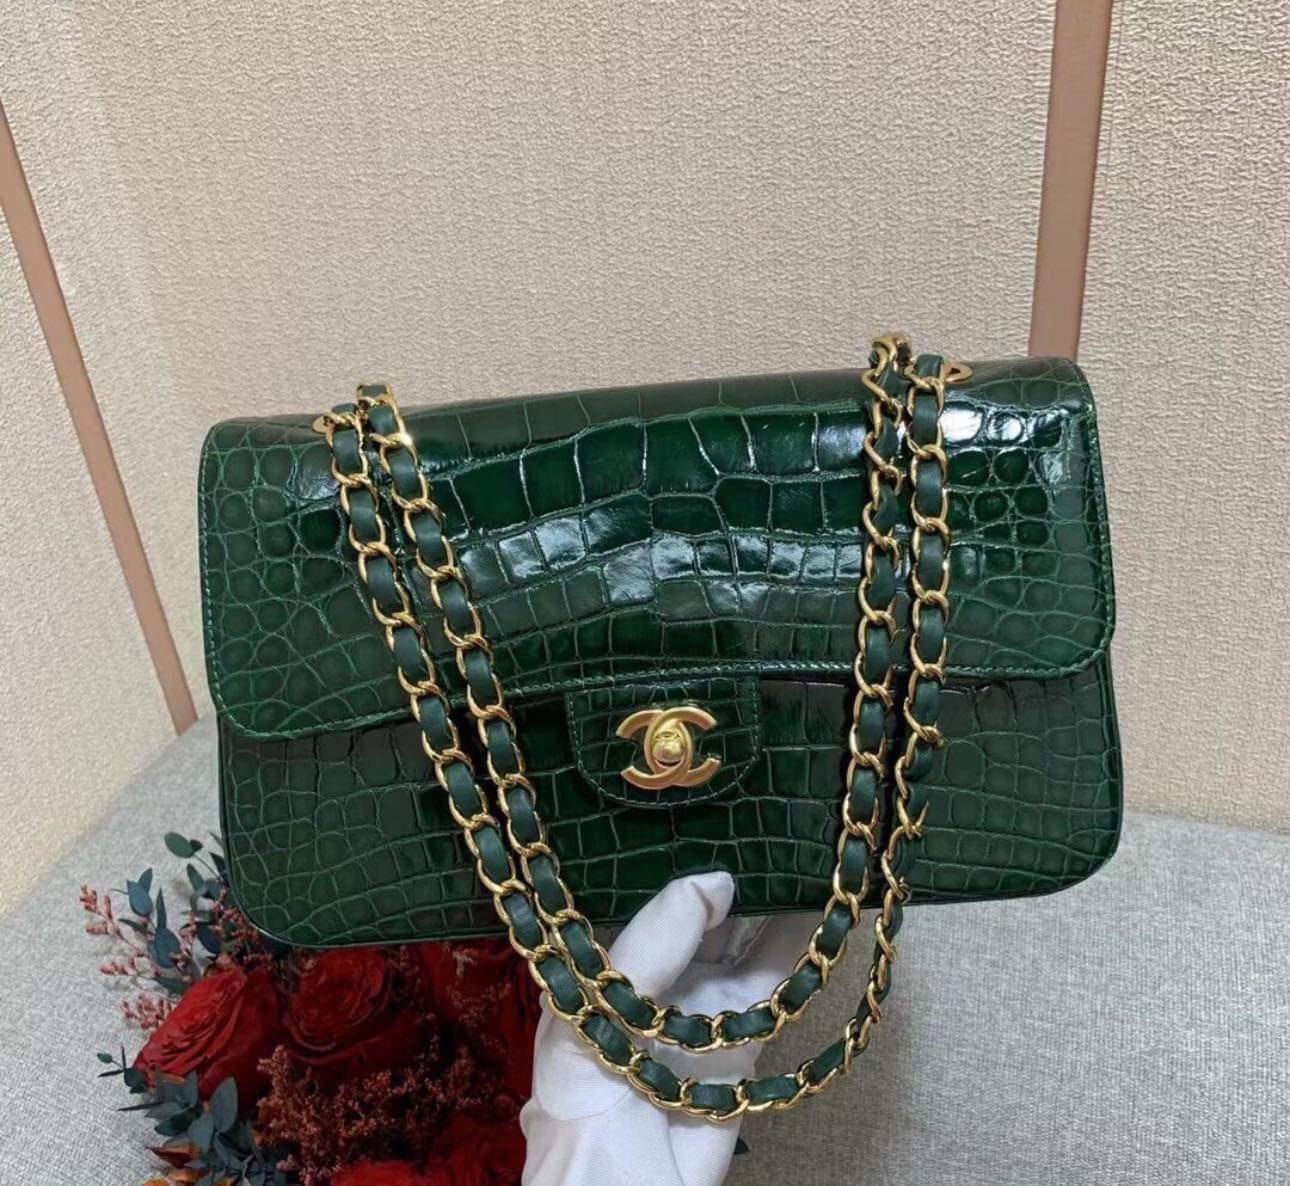 Chanel Alligator Medium Emerald Double Flap Bag with Gold Hardware For Sale 2